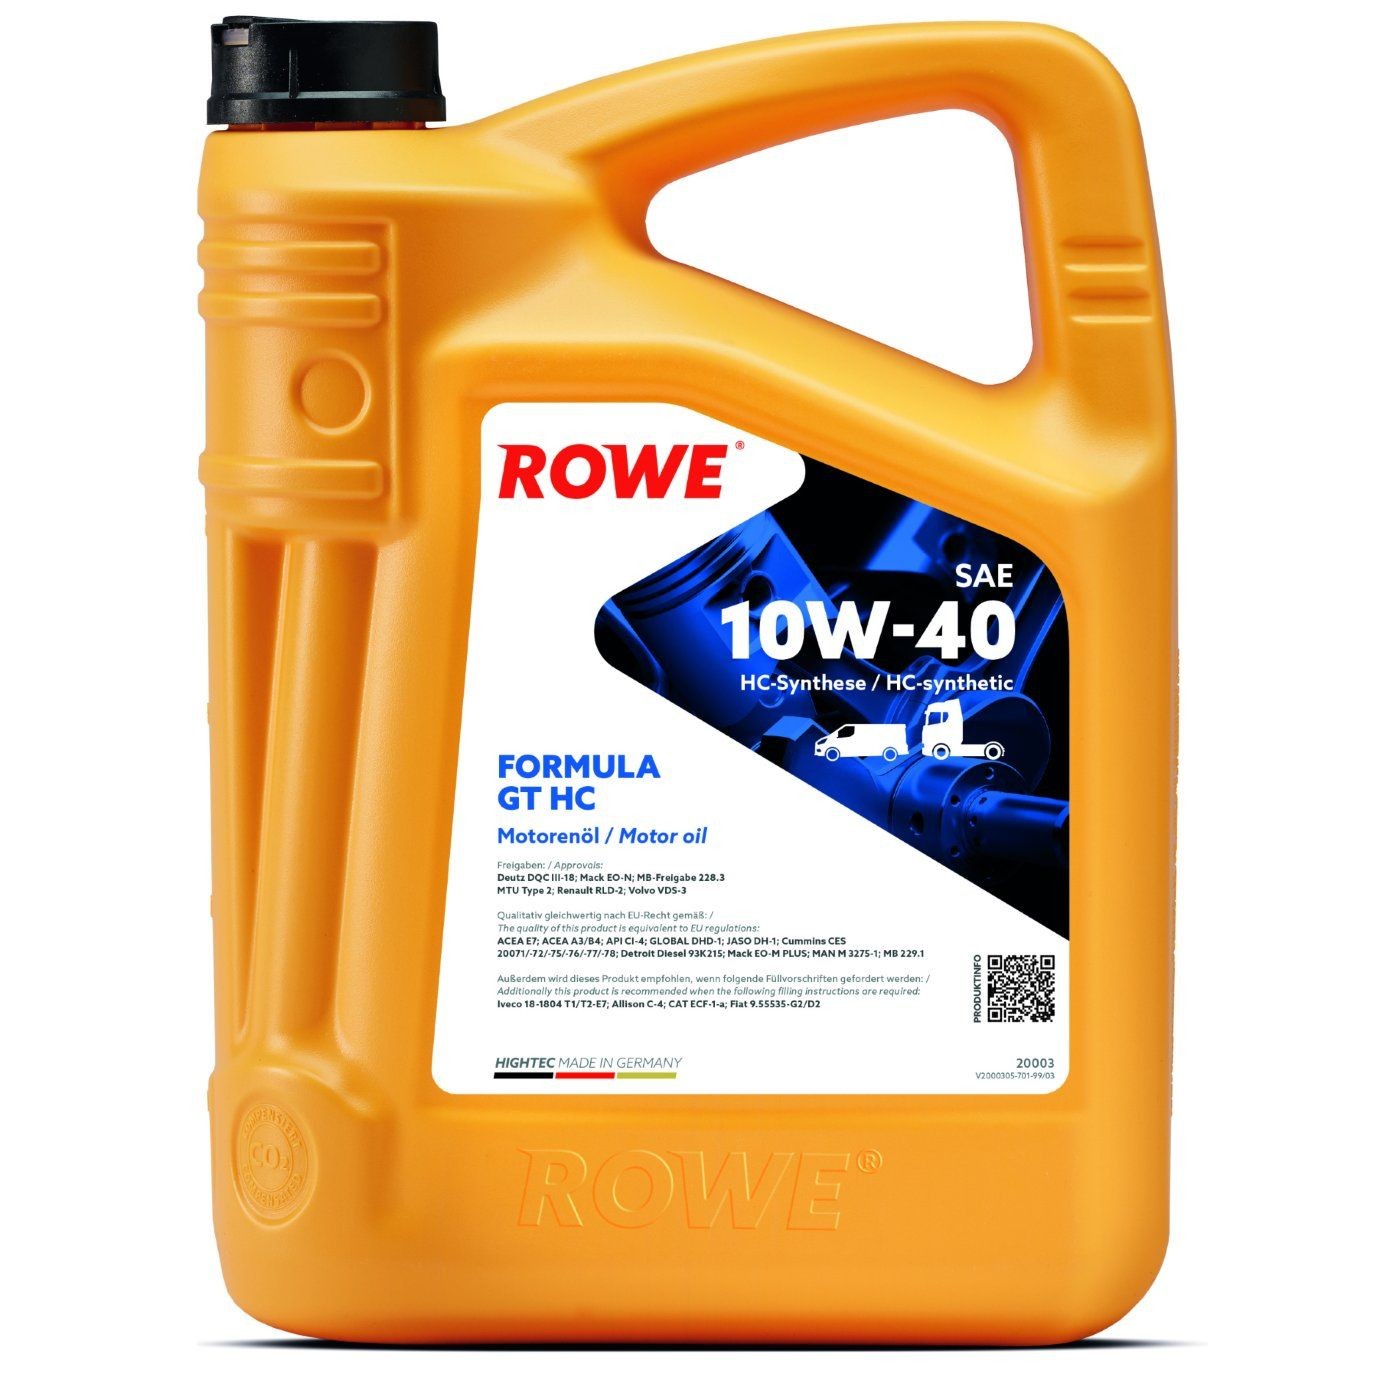 Automobile oil ROWE 10W-40, 5l, Part Synthetic Oil longlife 20003-0050-99